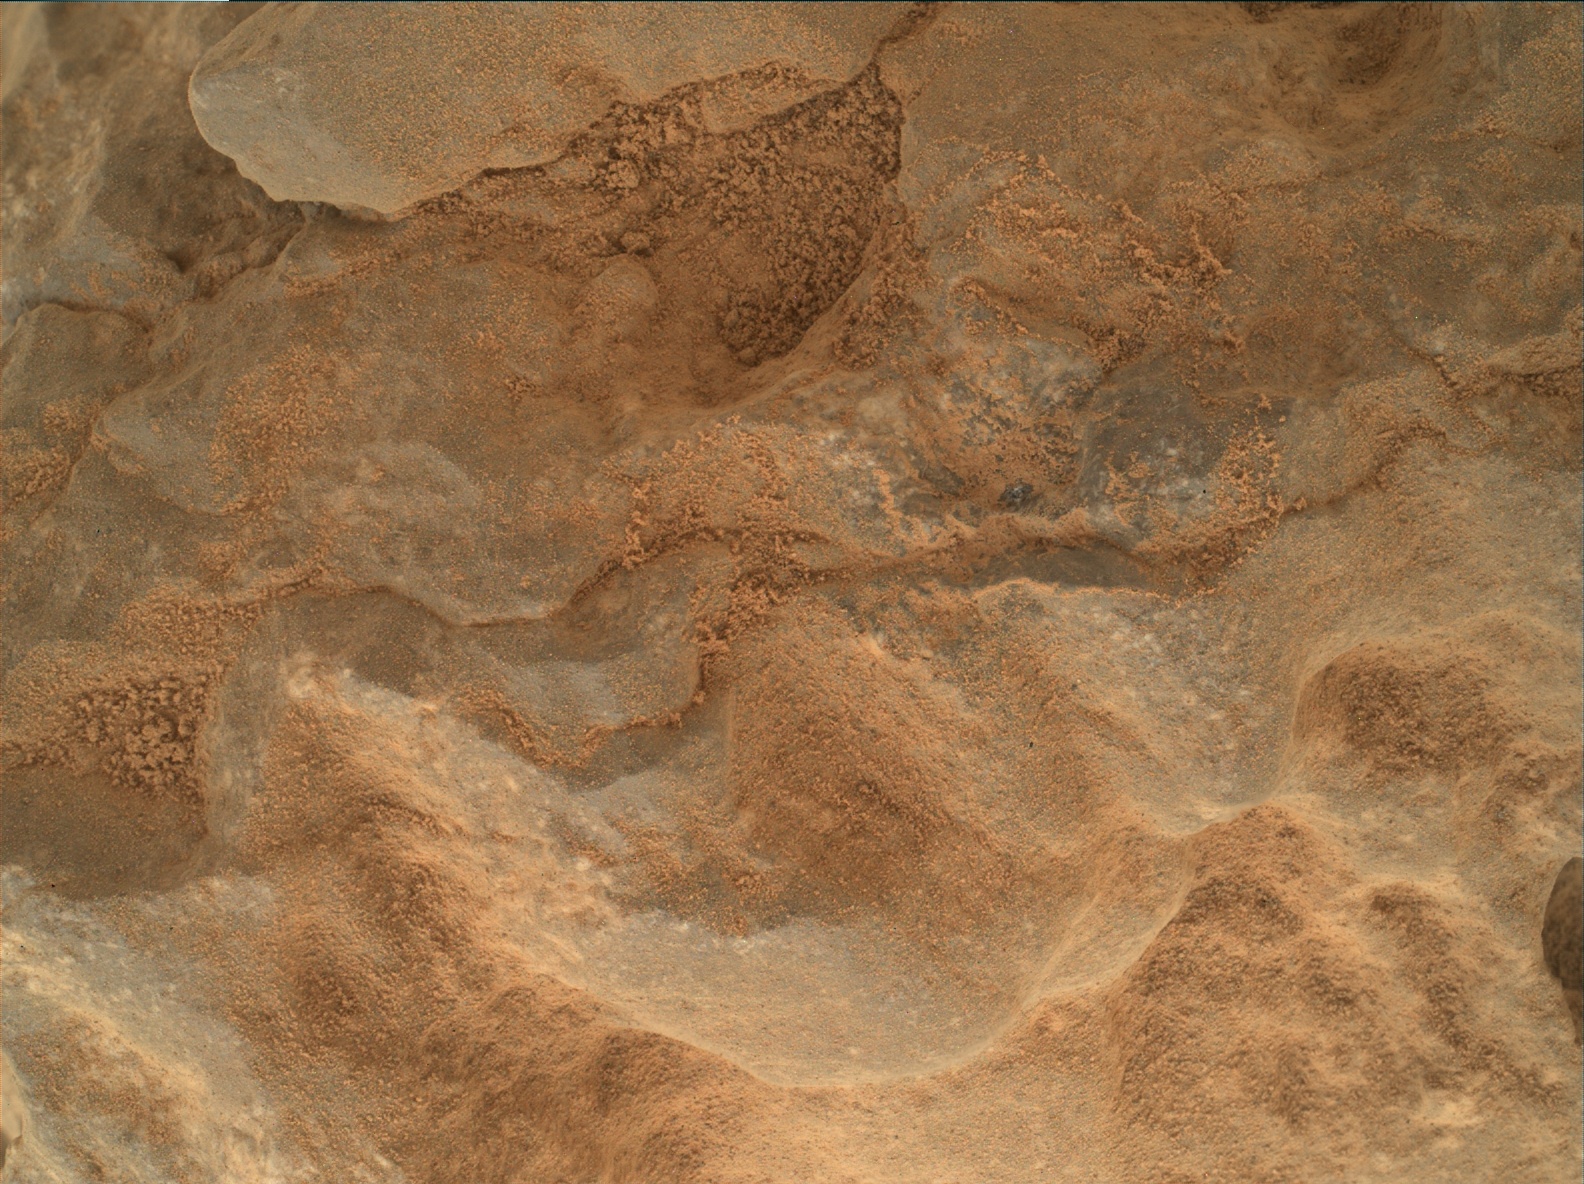 Nasa's Mars rover Curiosity acquired this image using its Mars Hand Lens Imager (MAHLI) on Sol 688